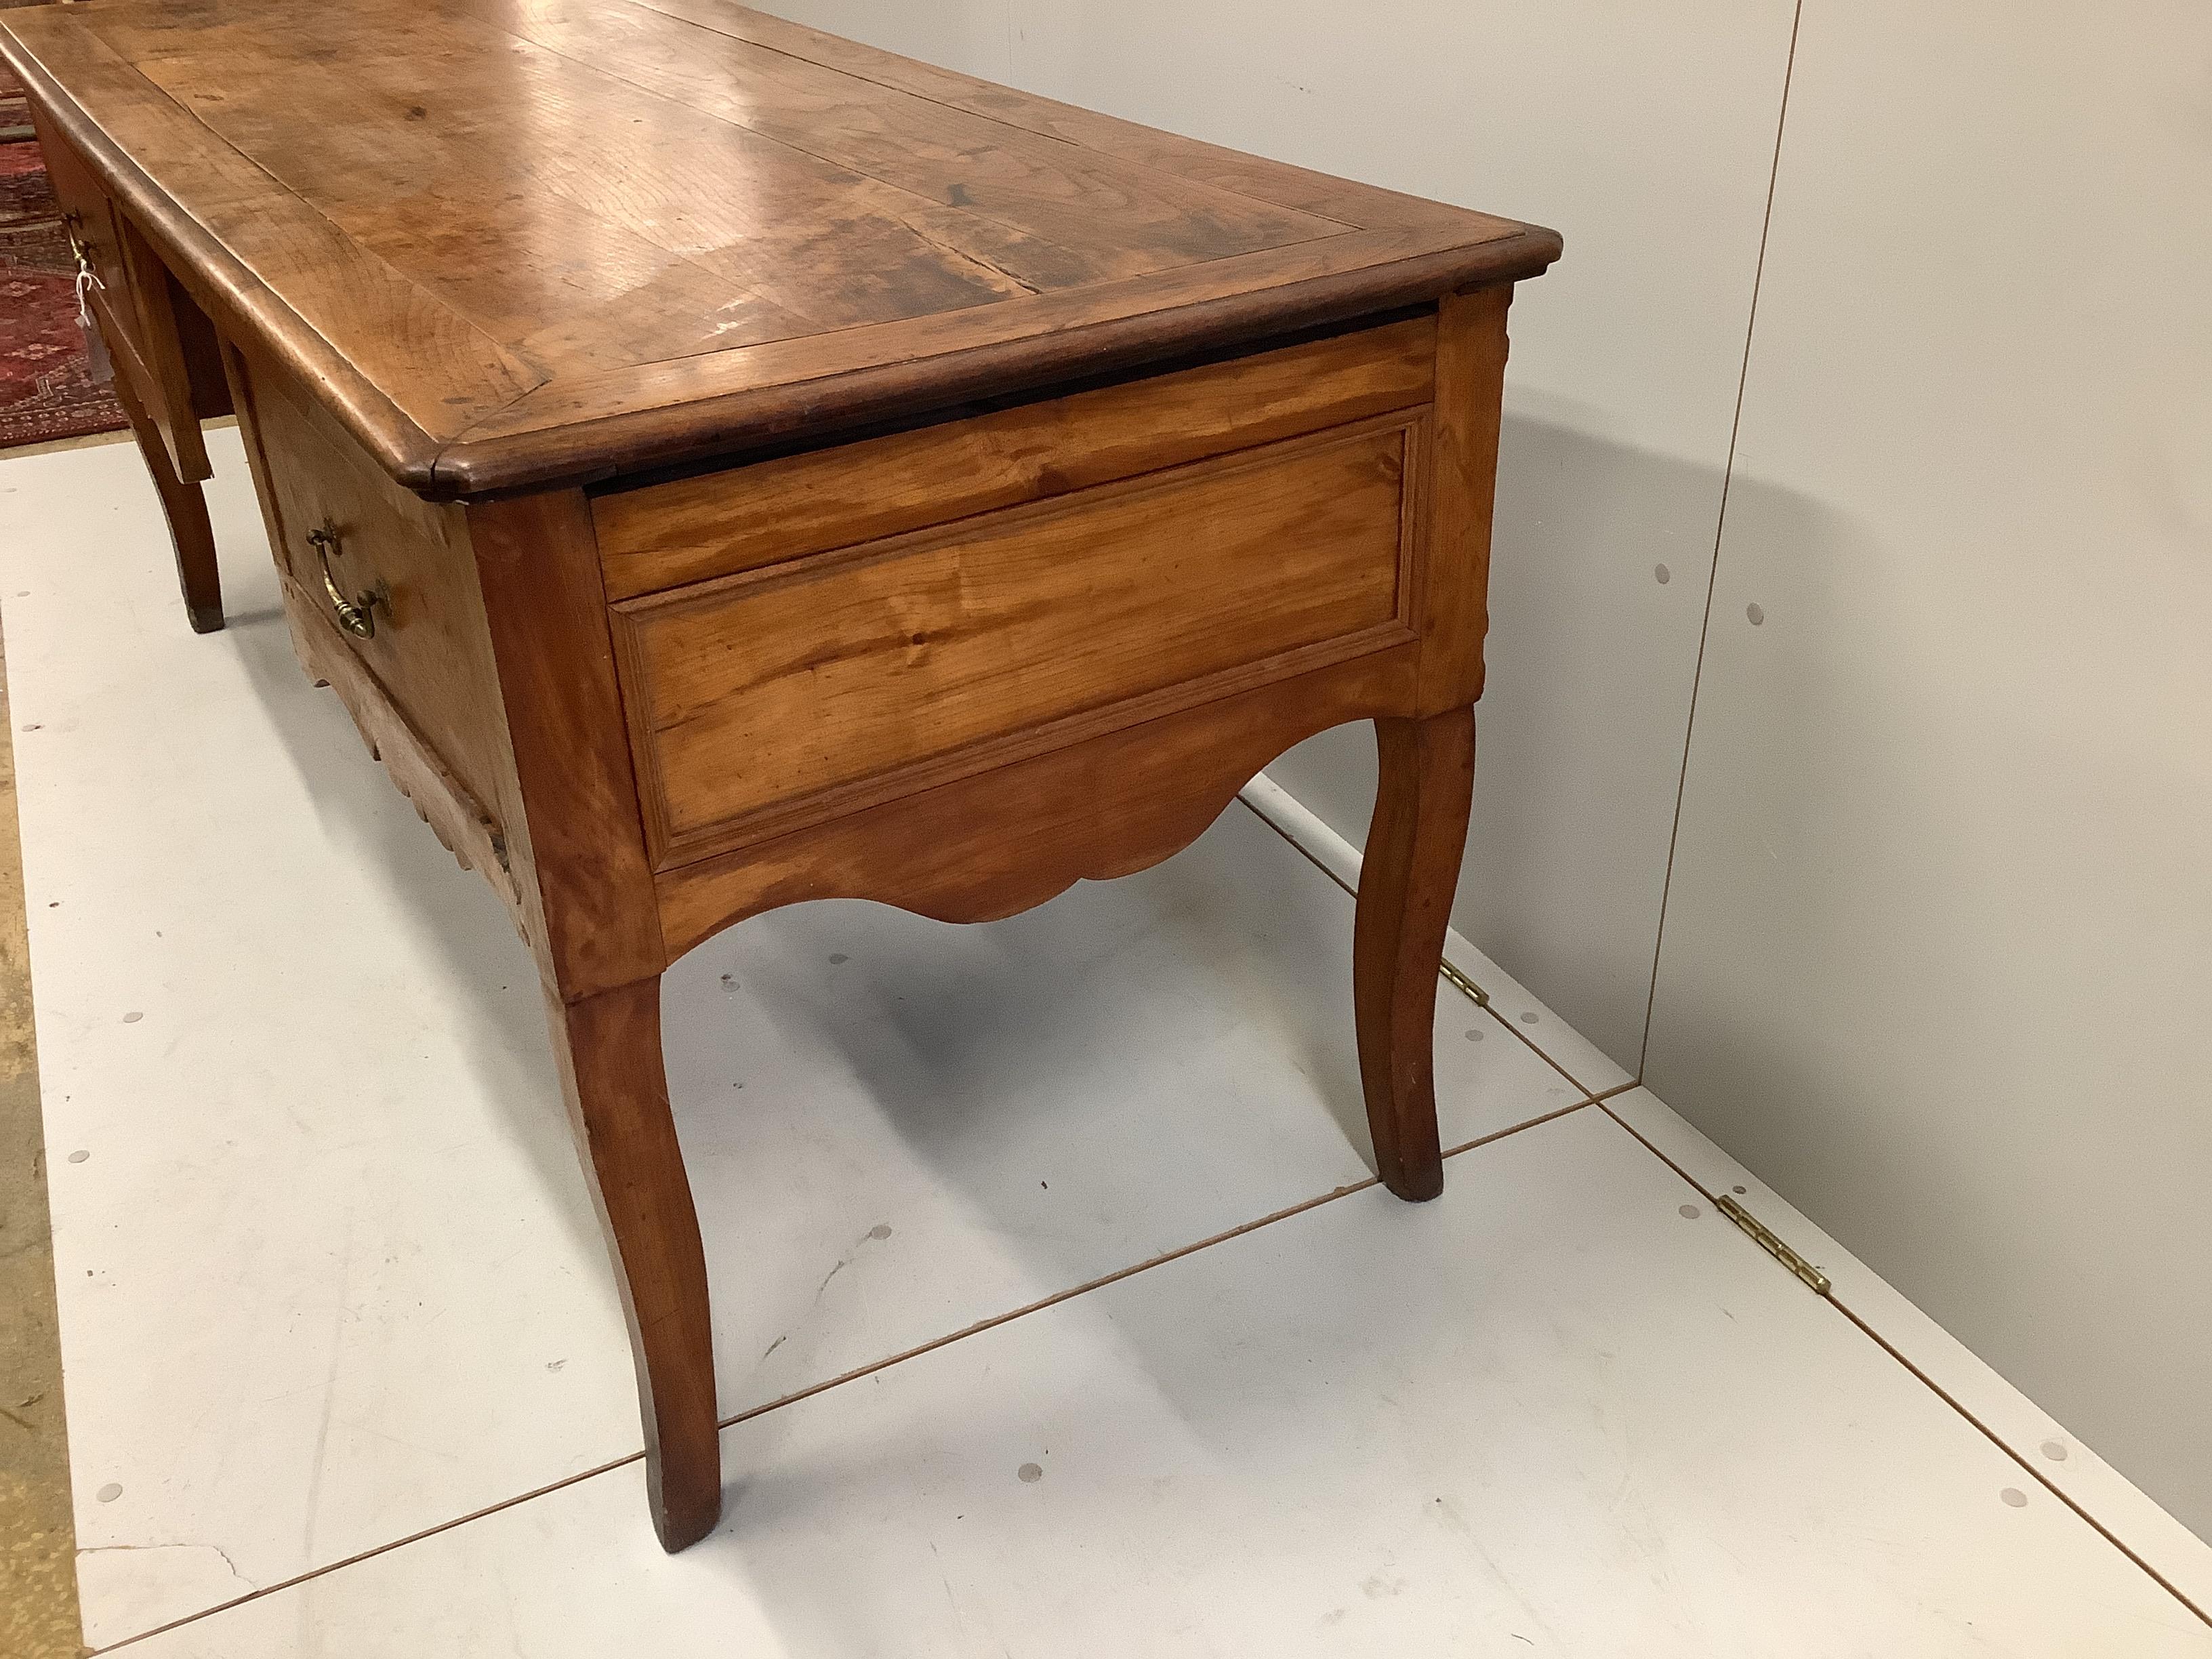 A late 18th century French Provincial fruitwood kneehole table, width 178cm, depth 70cm, height 74cm